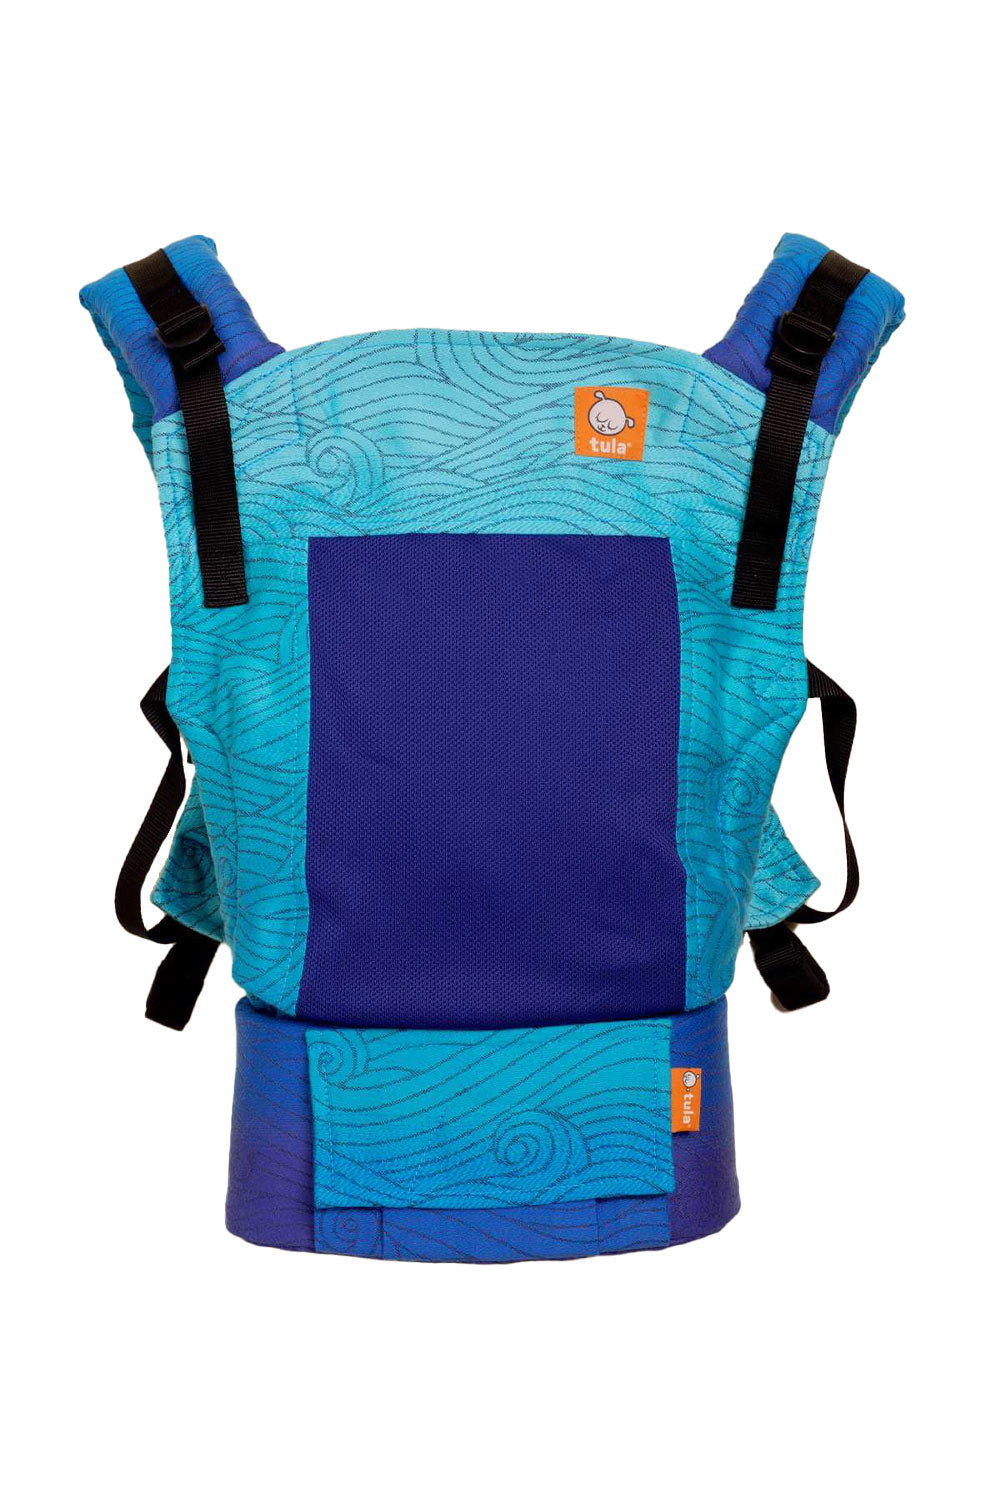 Coast Rei Harbour - Signature Woven Free-to-Grow Baby Carrier